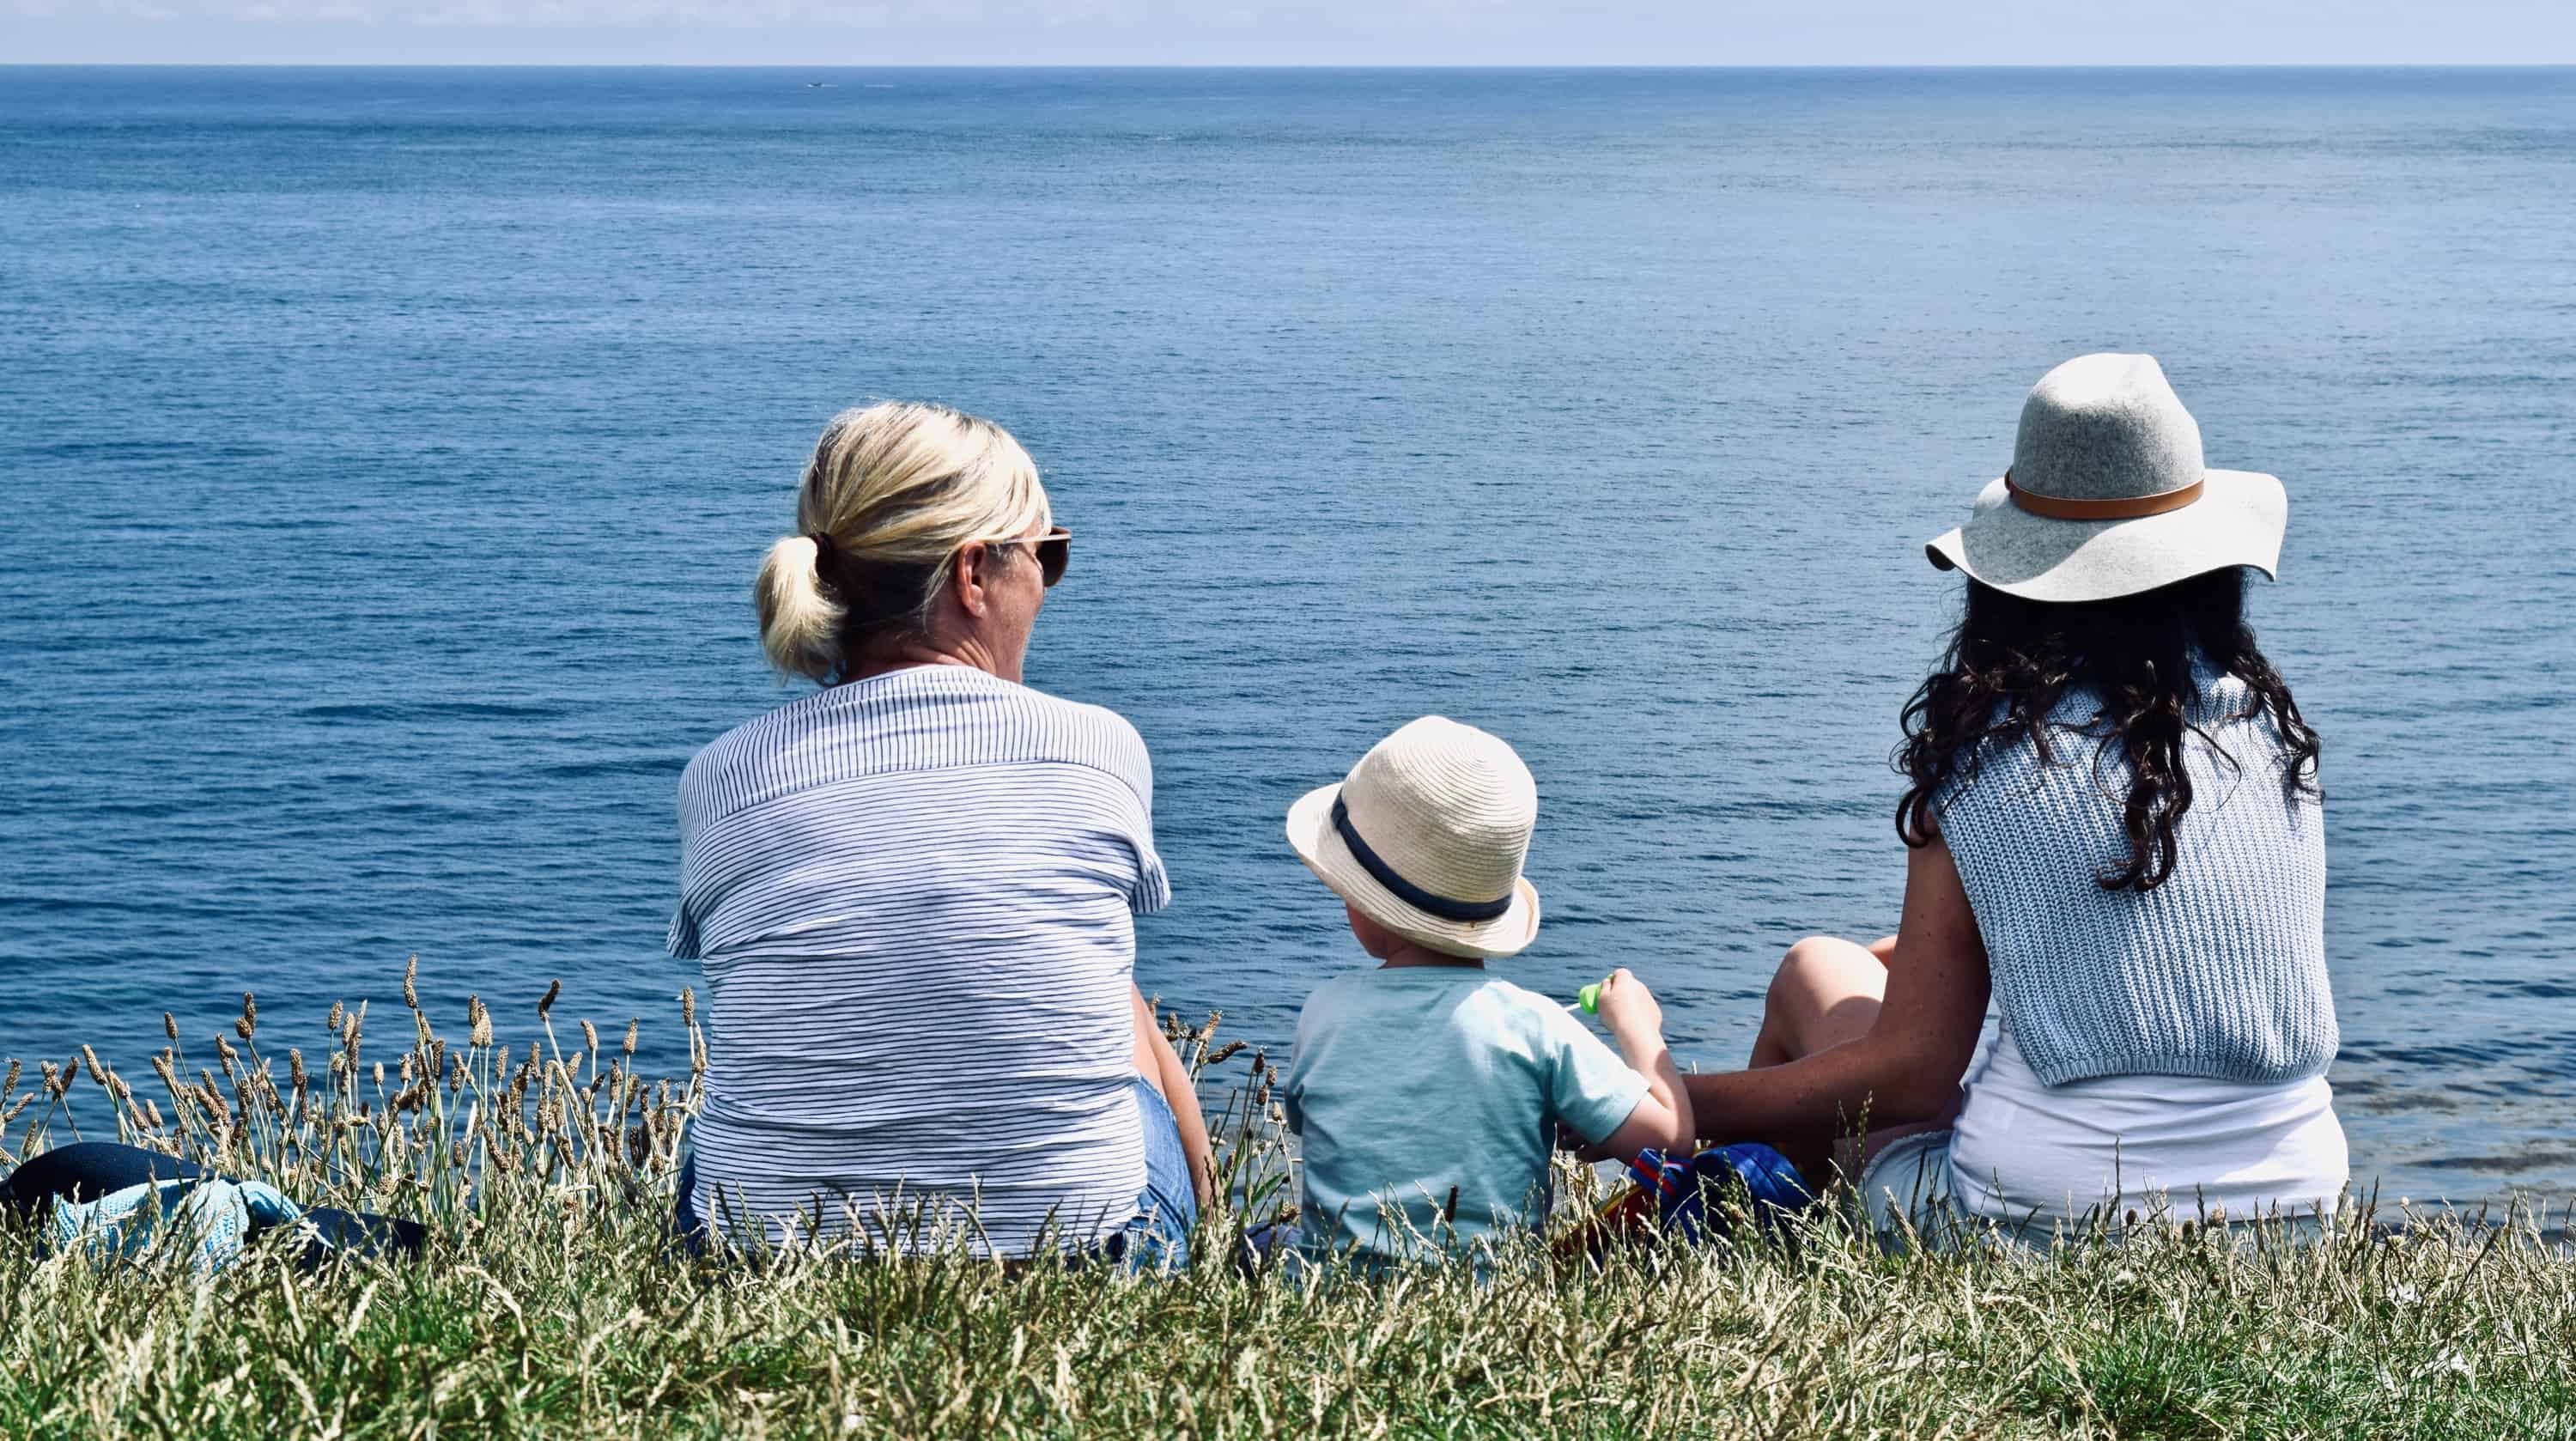 A grandmother, young child and young woman sit on a grassy hill overlooking the ocean.